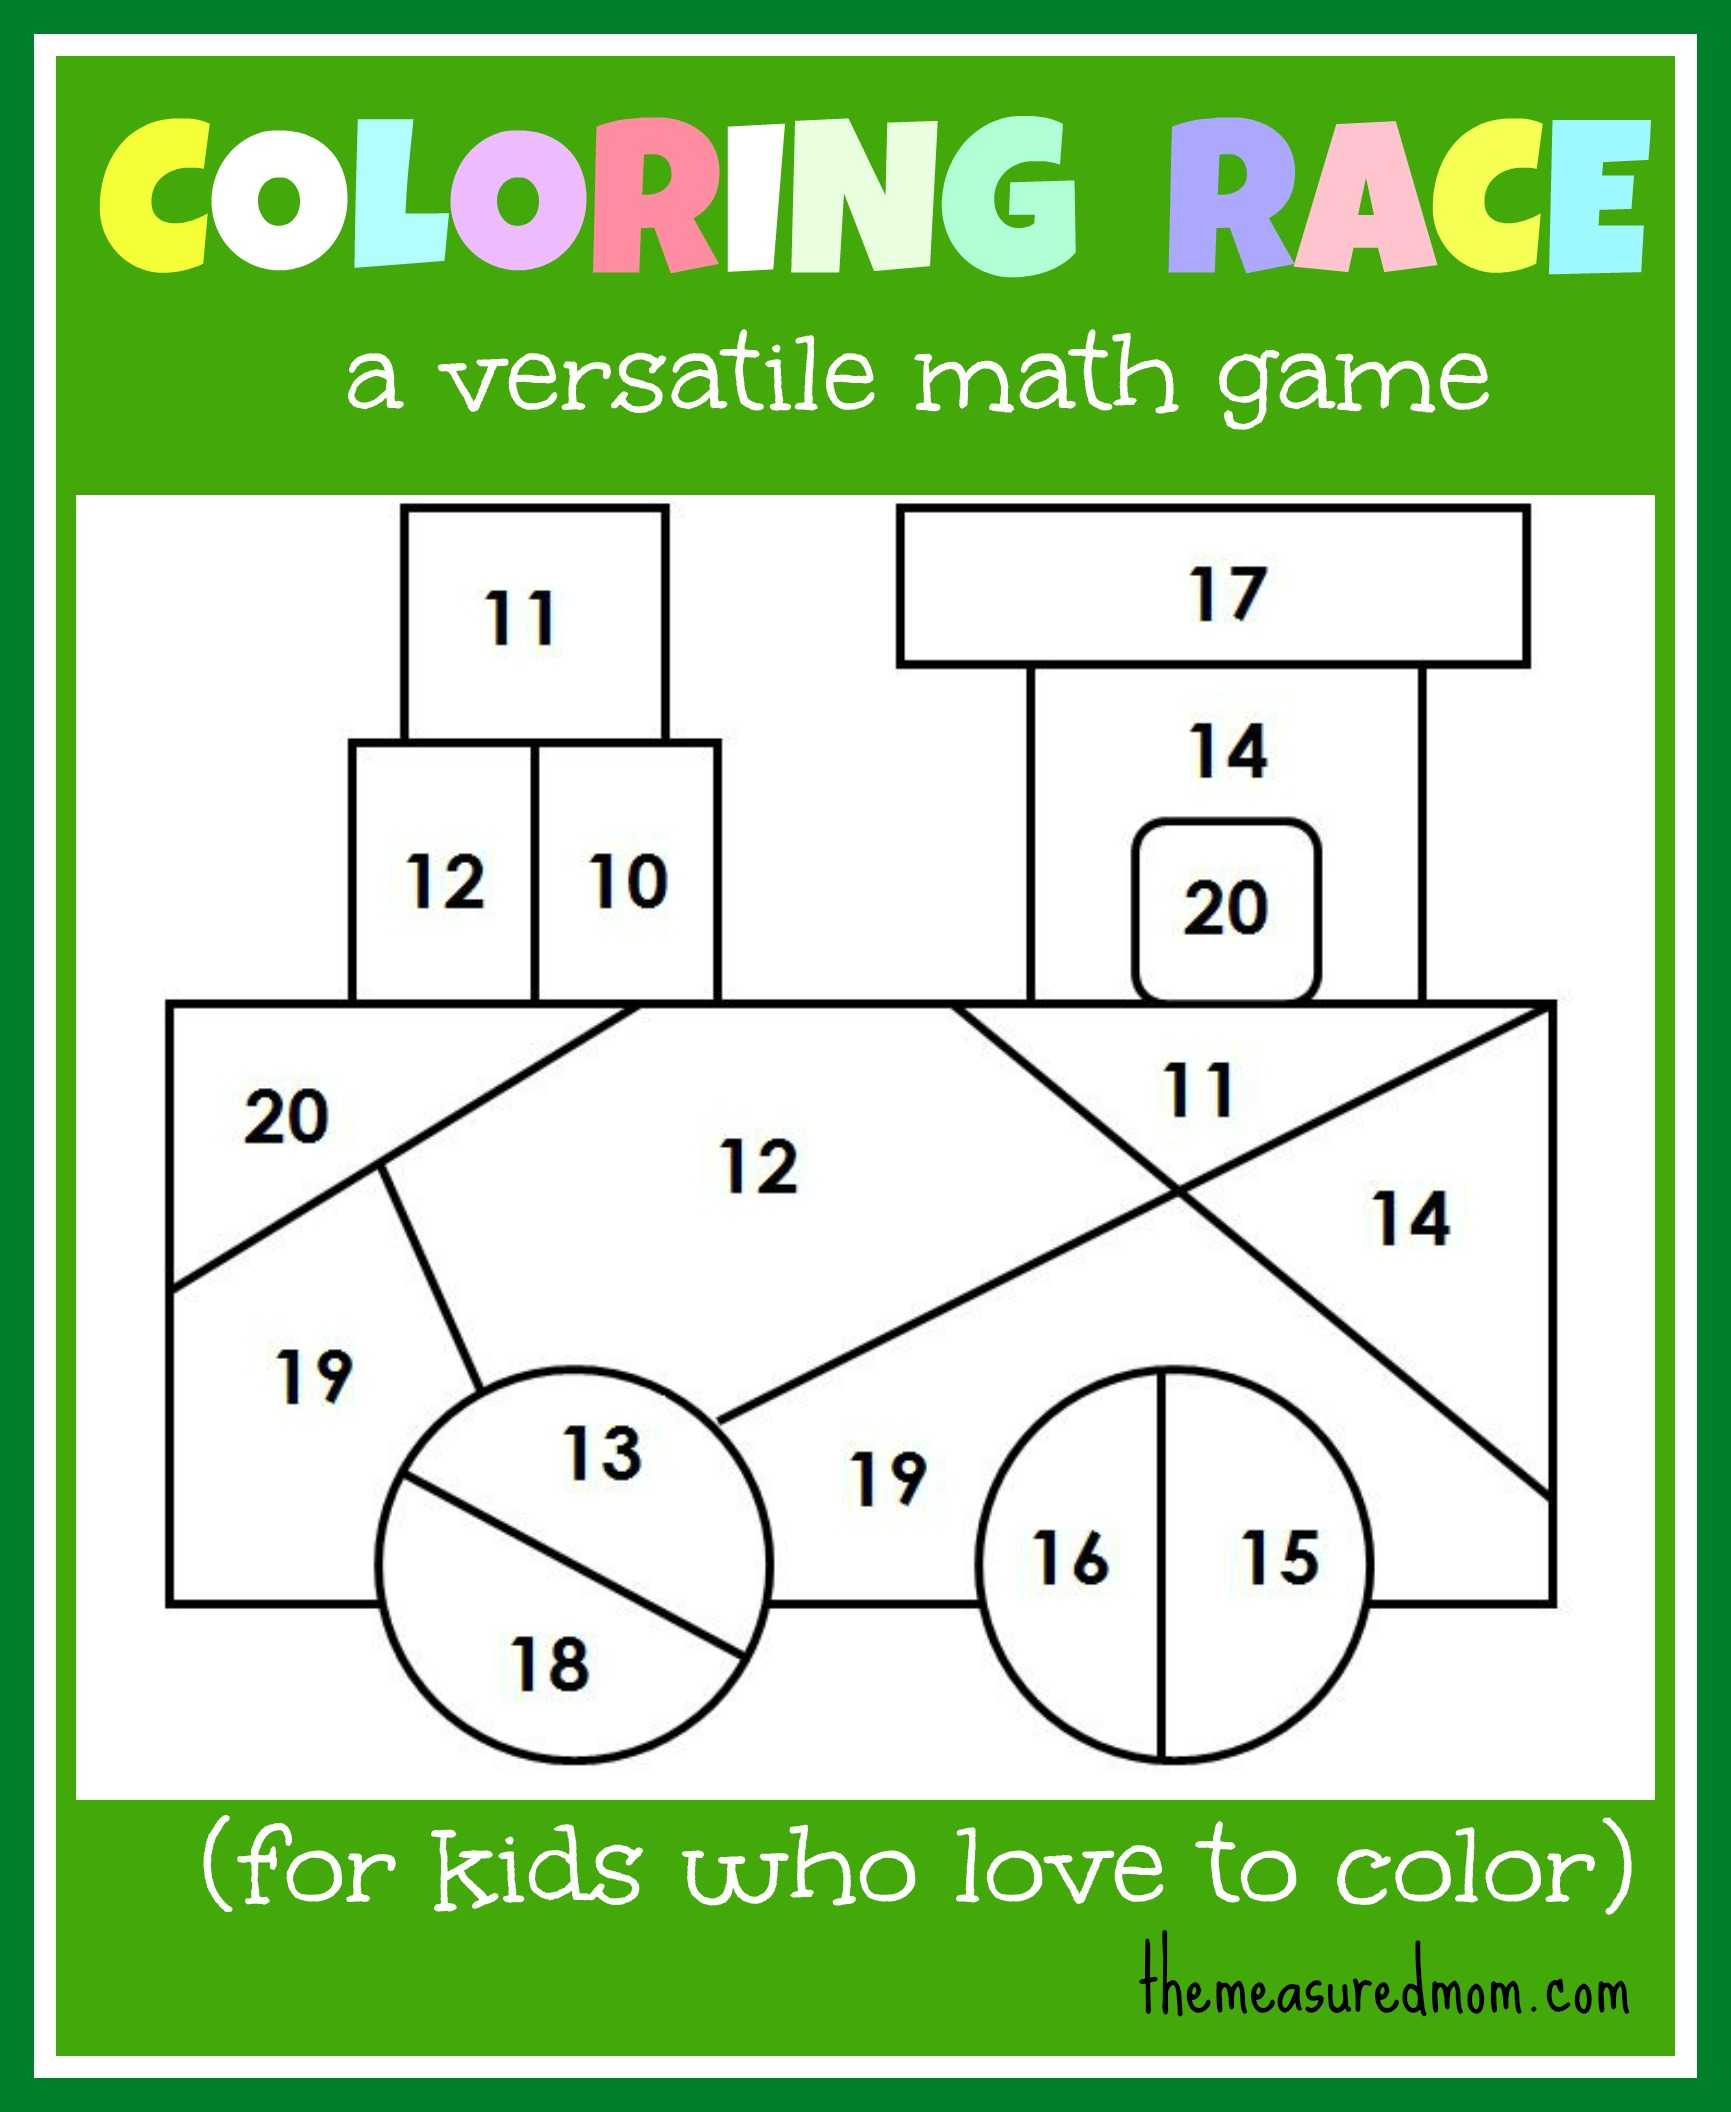 Sat Math Practice Worksheets as Well as Math Game for Kids Coloring Race Bines Math and Coloring the